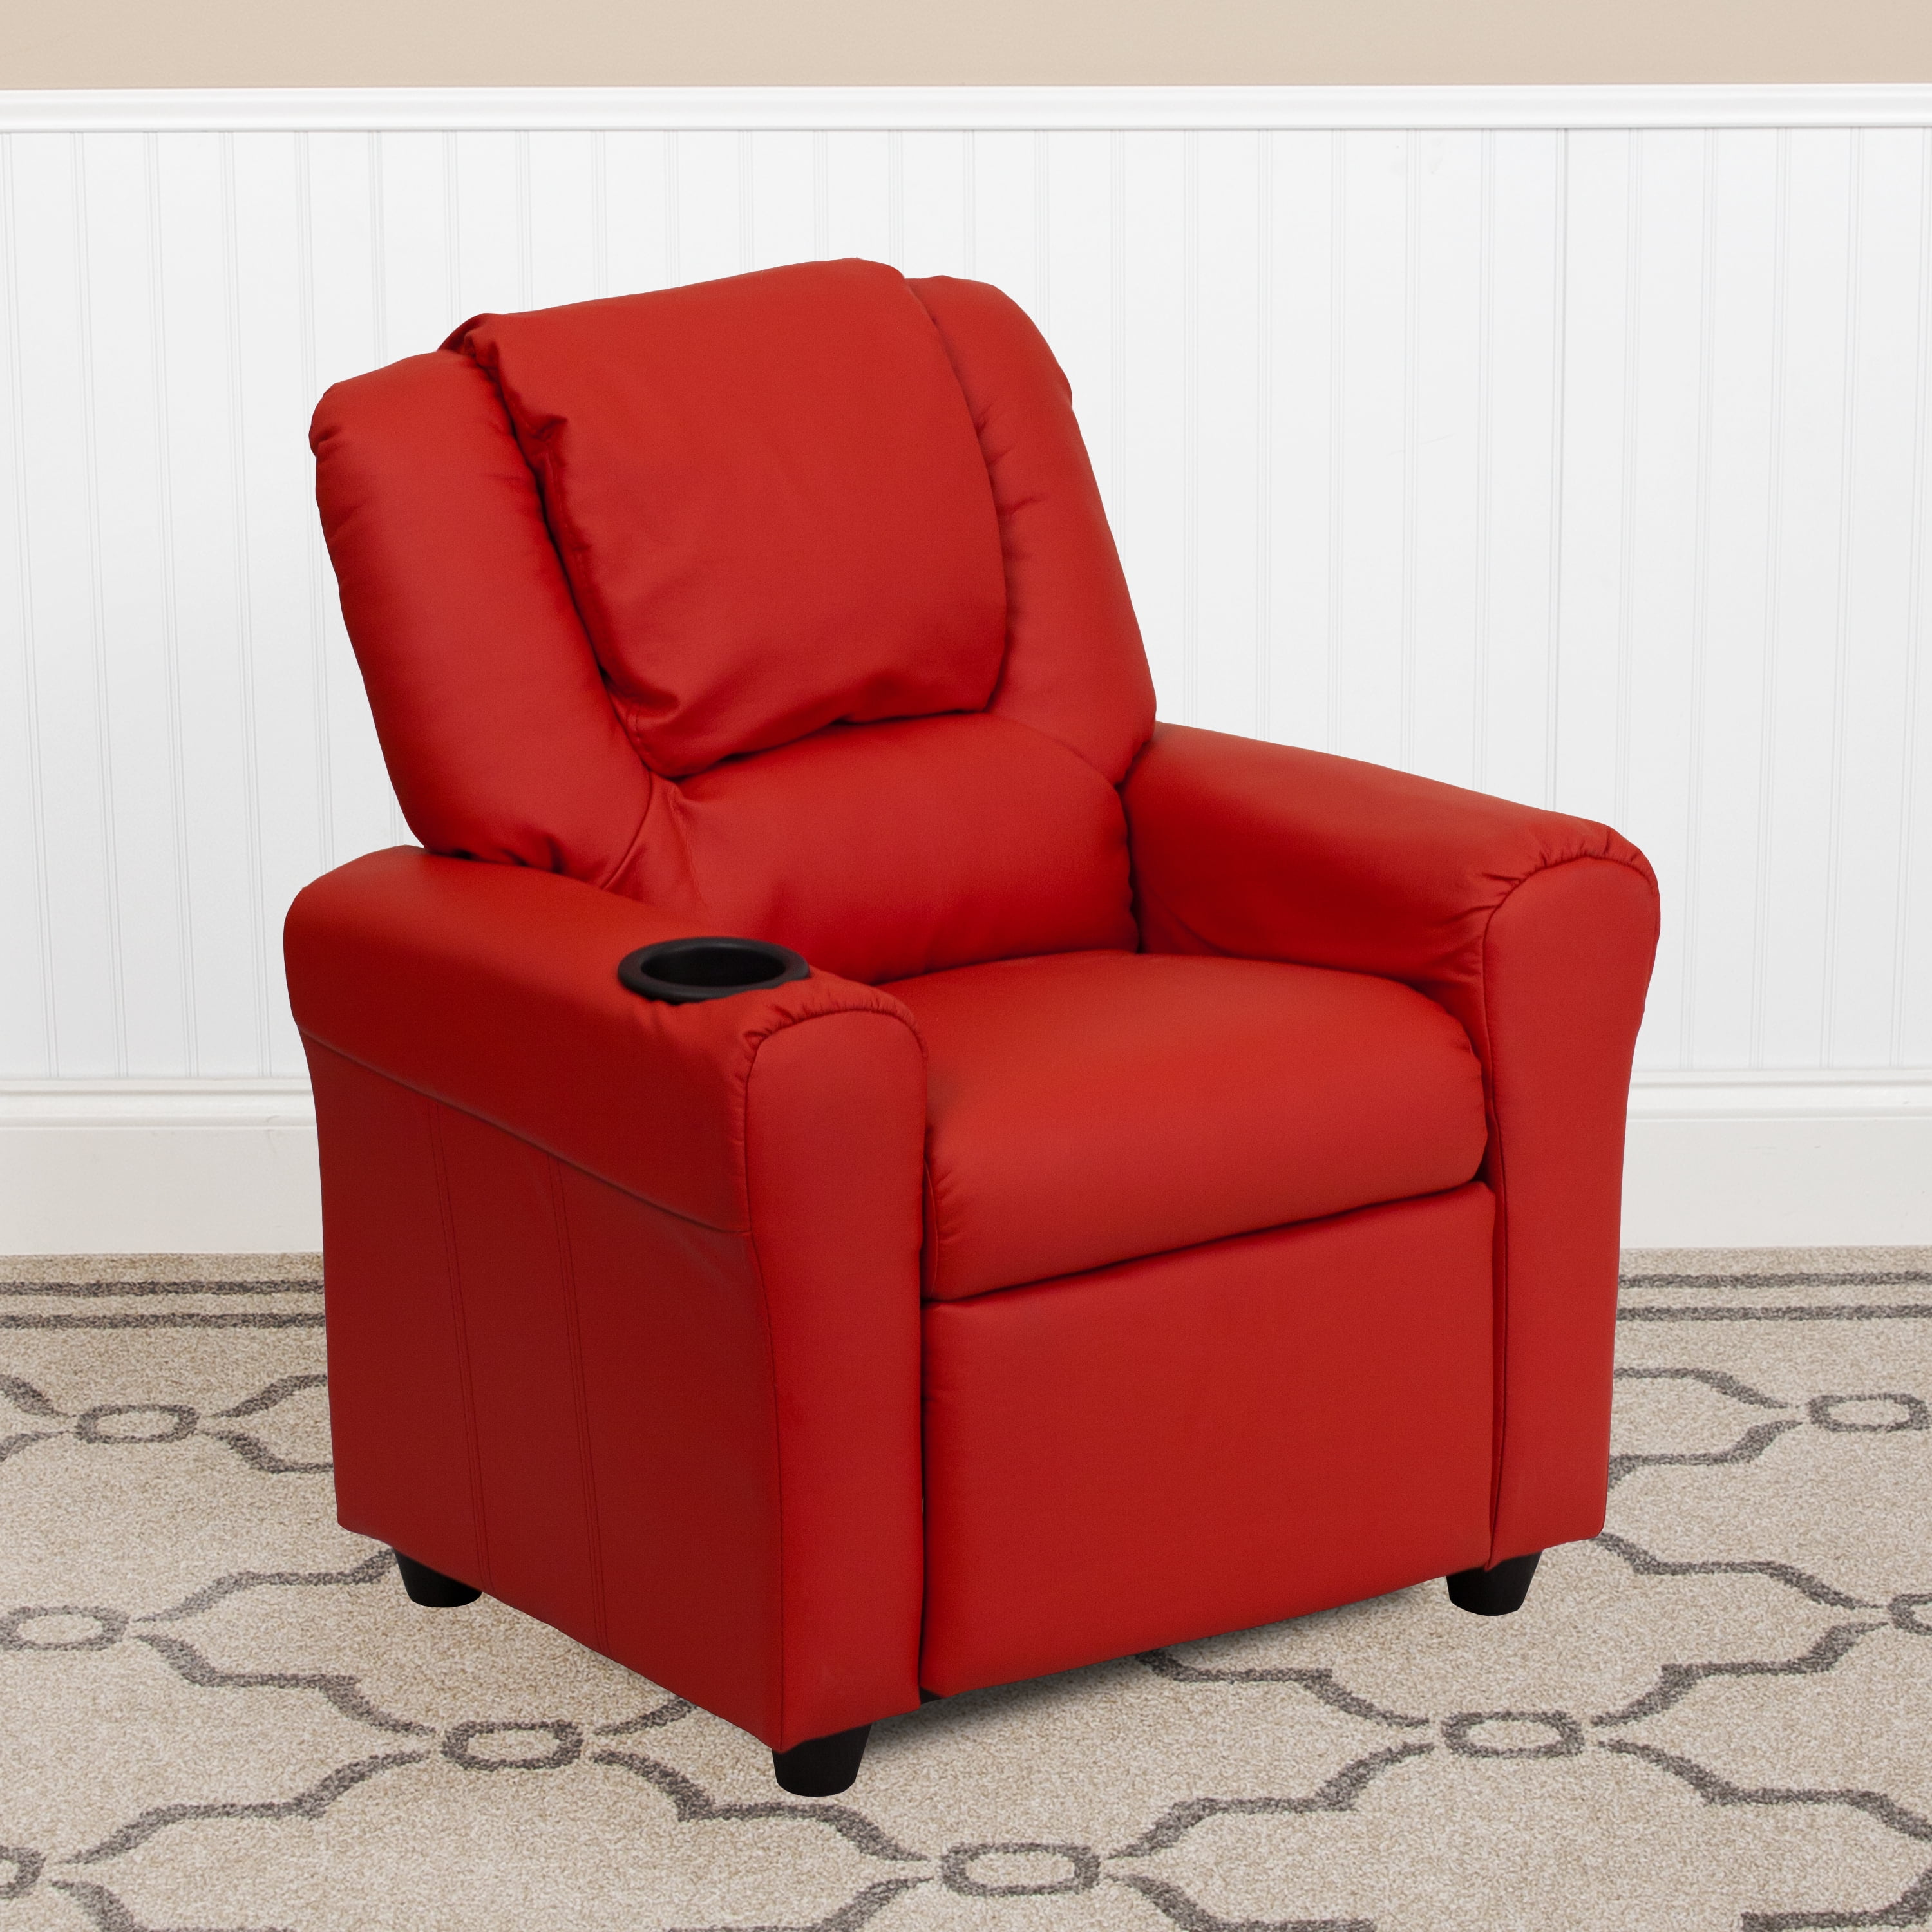 Details about   Faux Leather Push Back Theater Chair Comfortable Adjustable Luxury with 2 Colors 